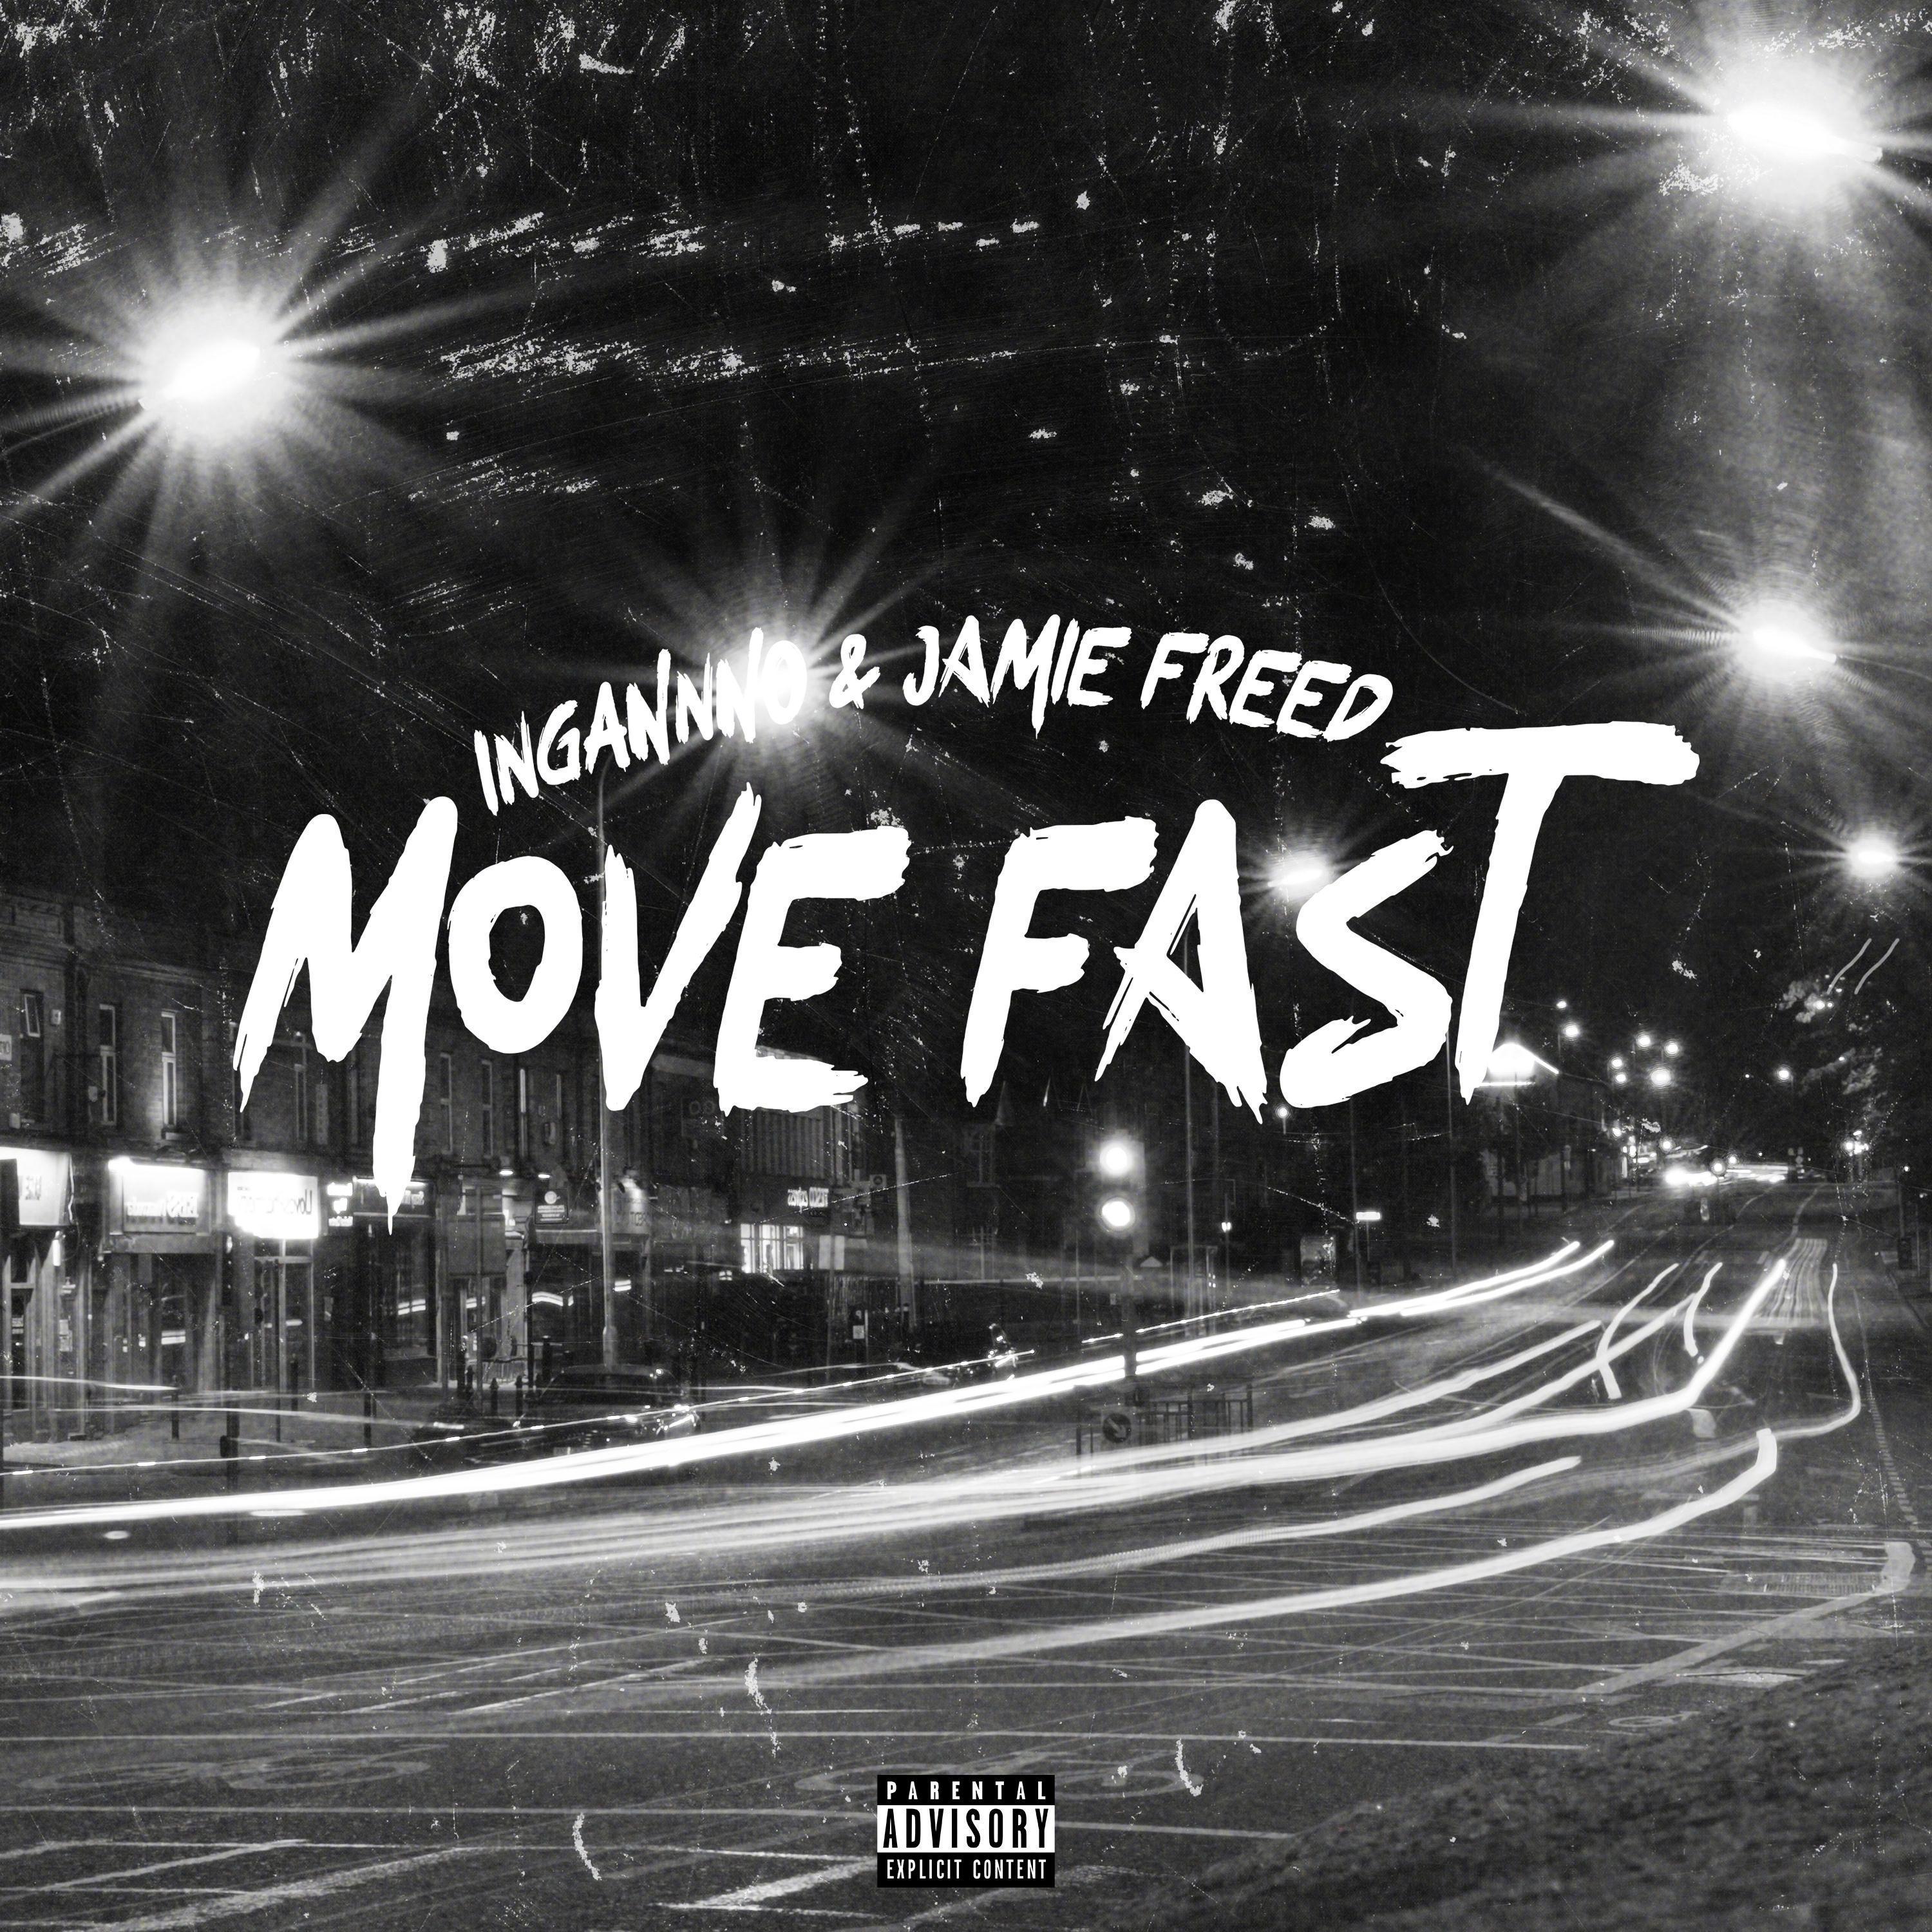 Ingannno - Move Fast (feat. JAMIE FREED)